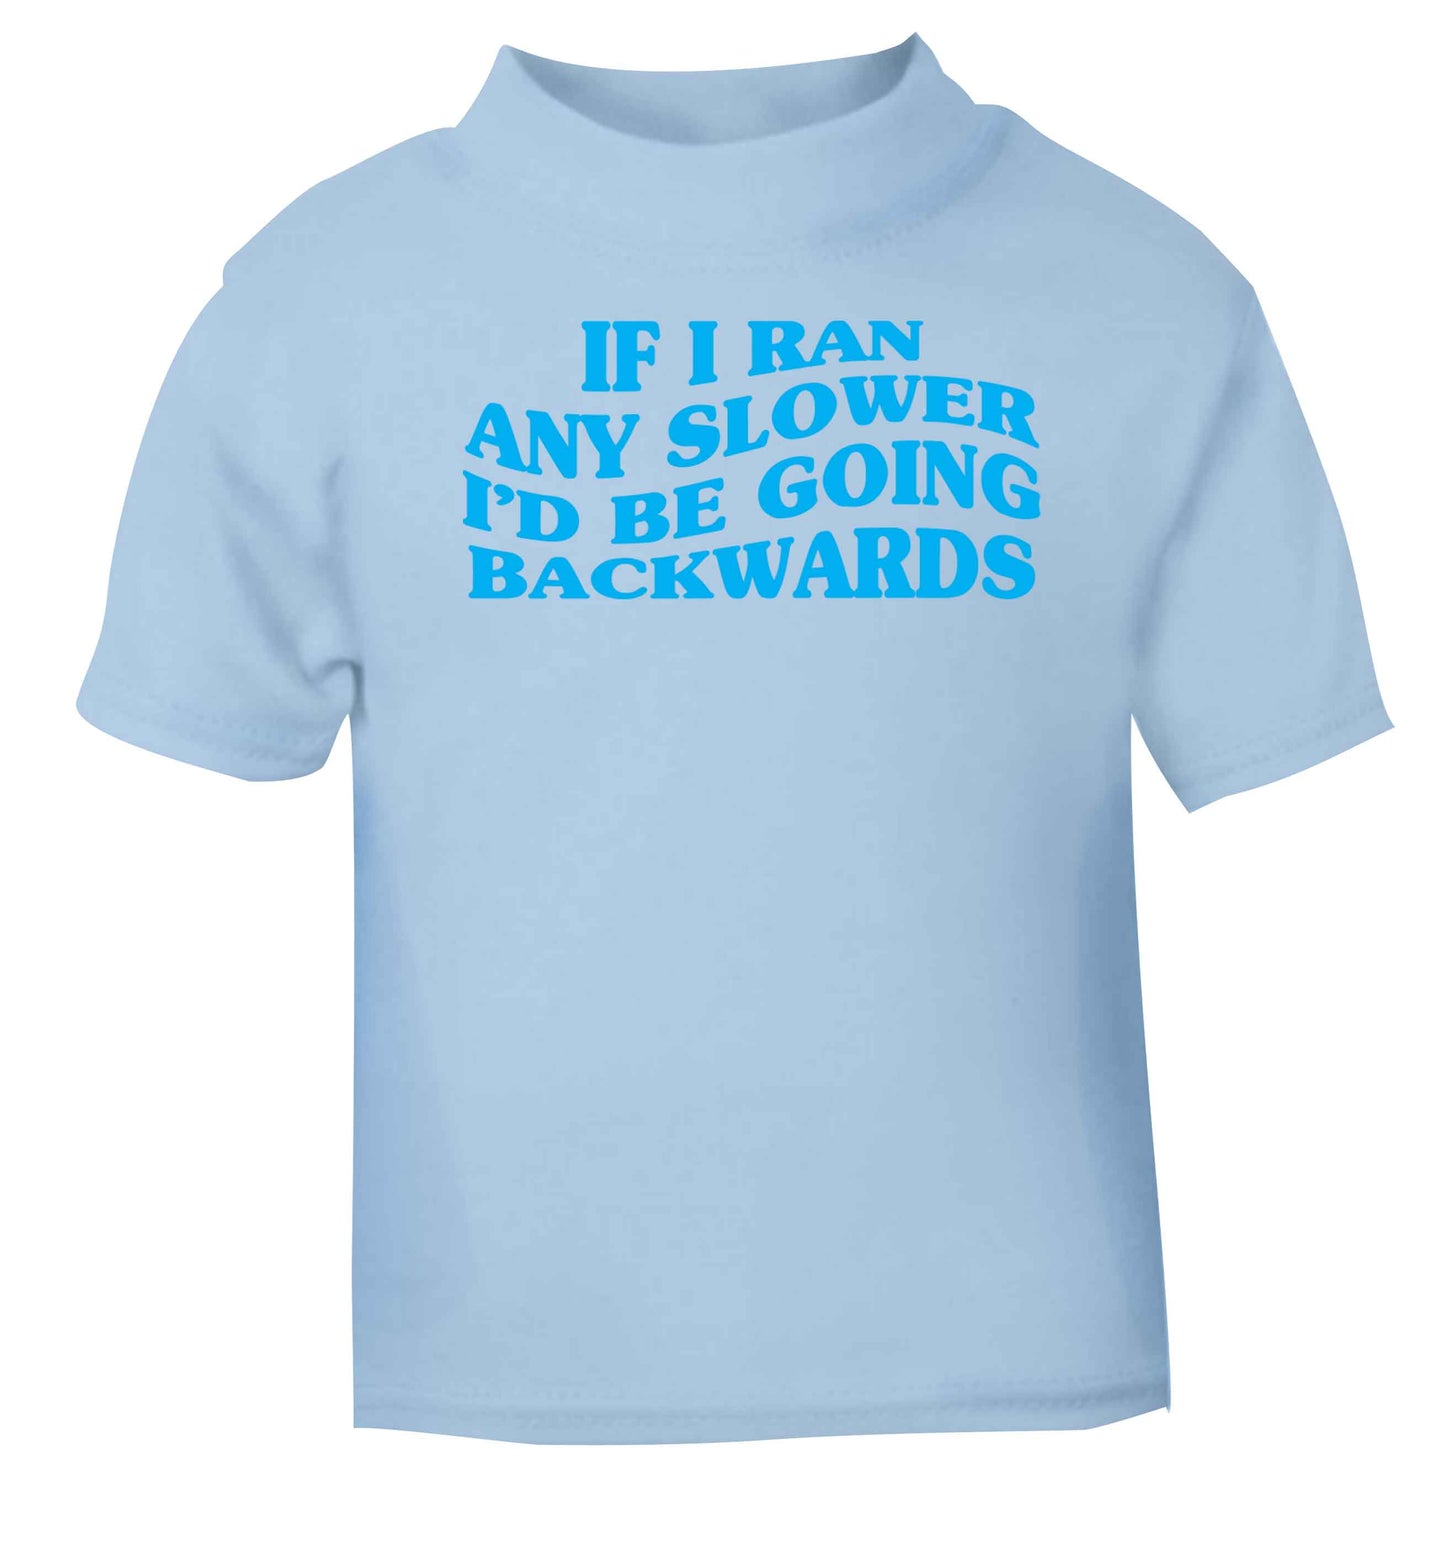 If I ran any slower I'd be going backwards light blue baby toddler Tshirt 2 Years